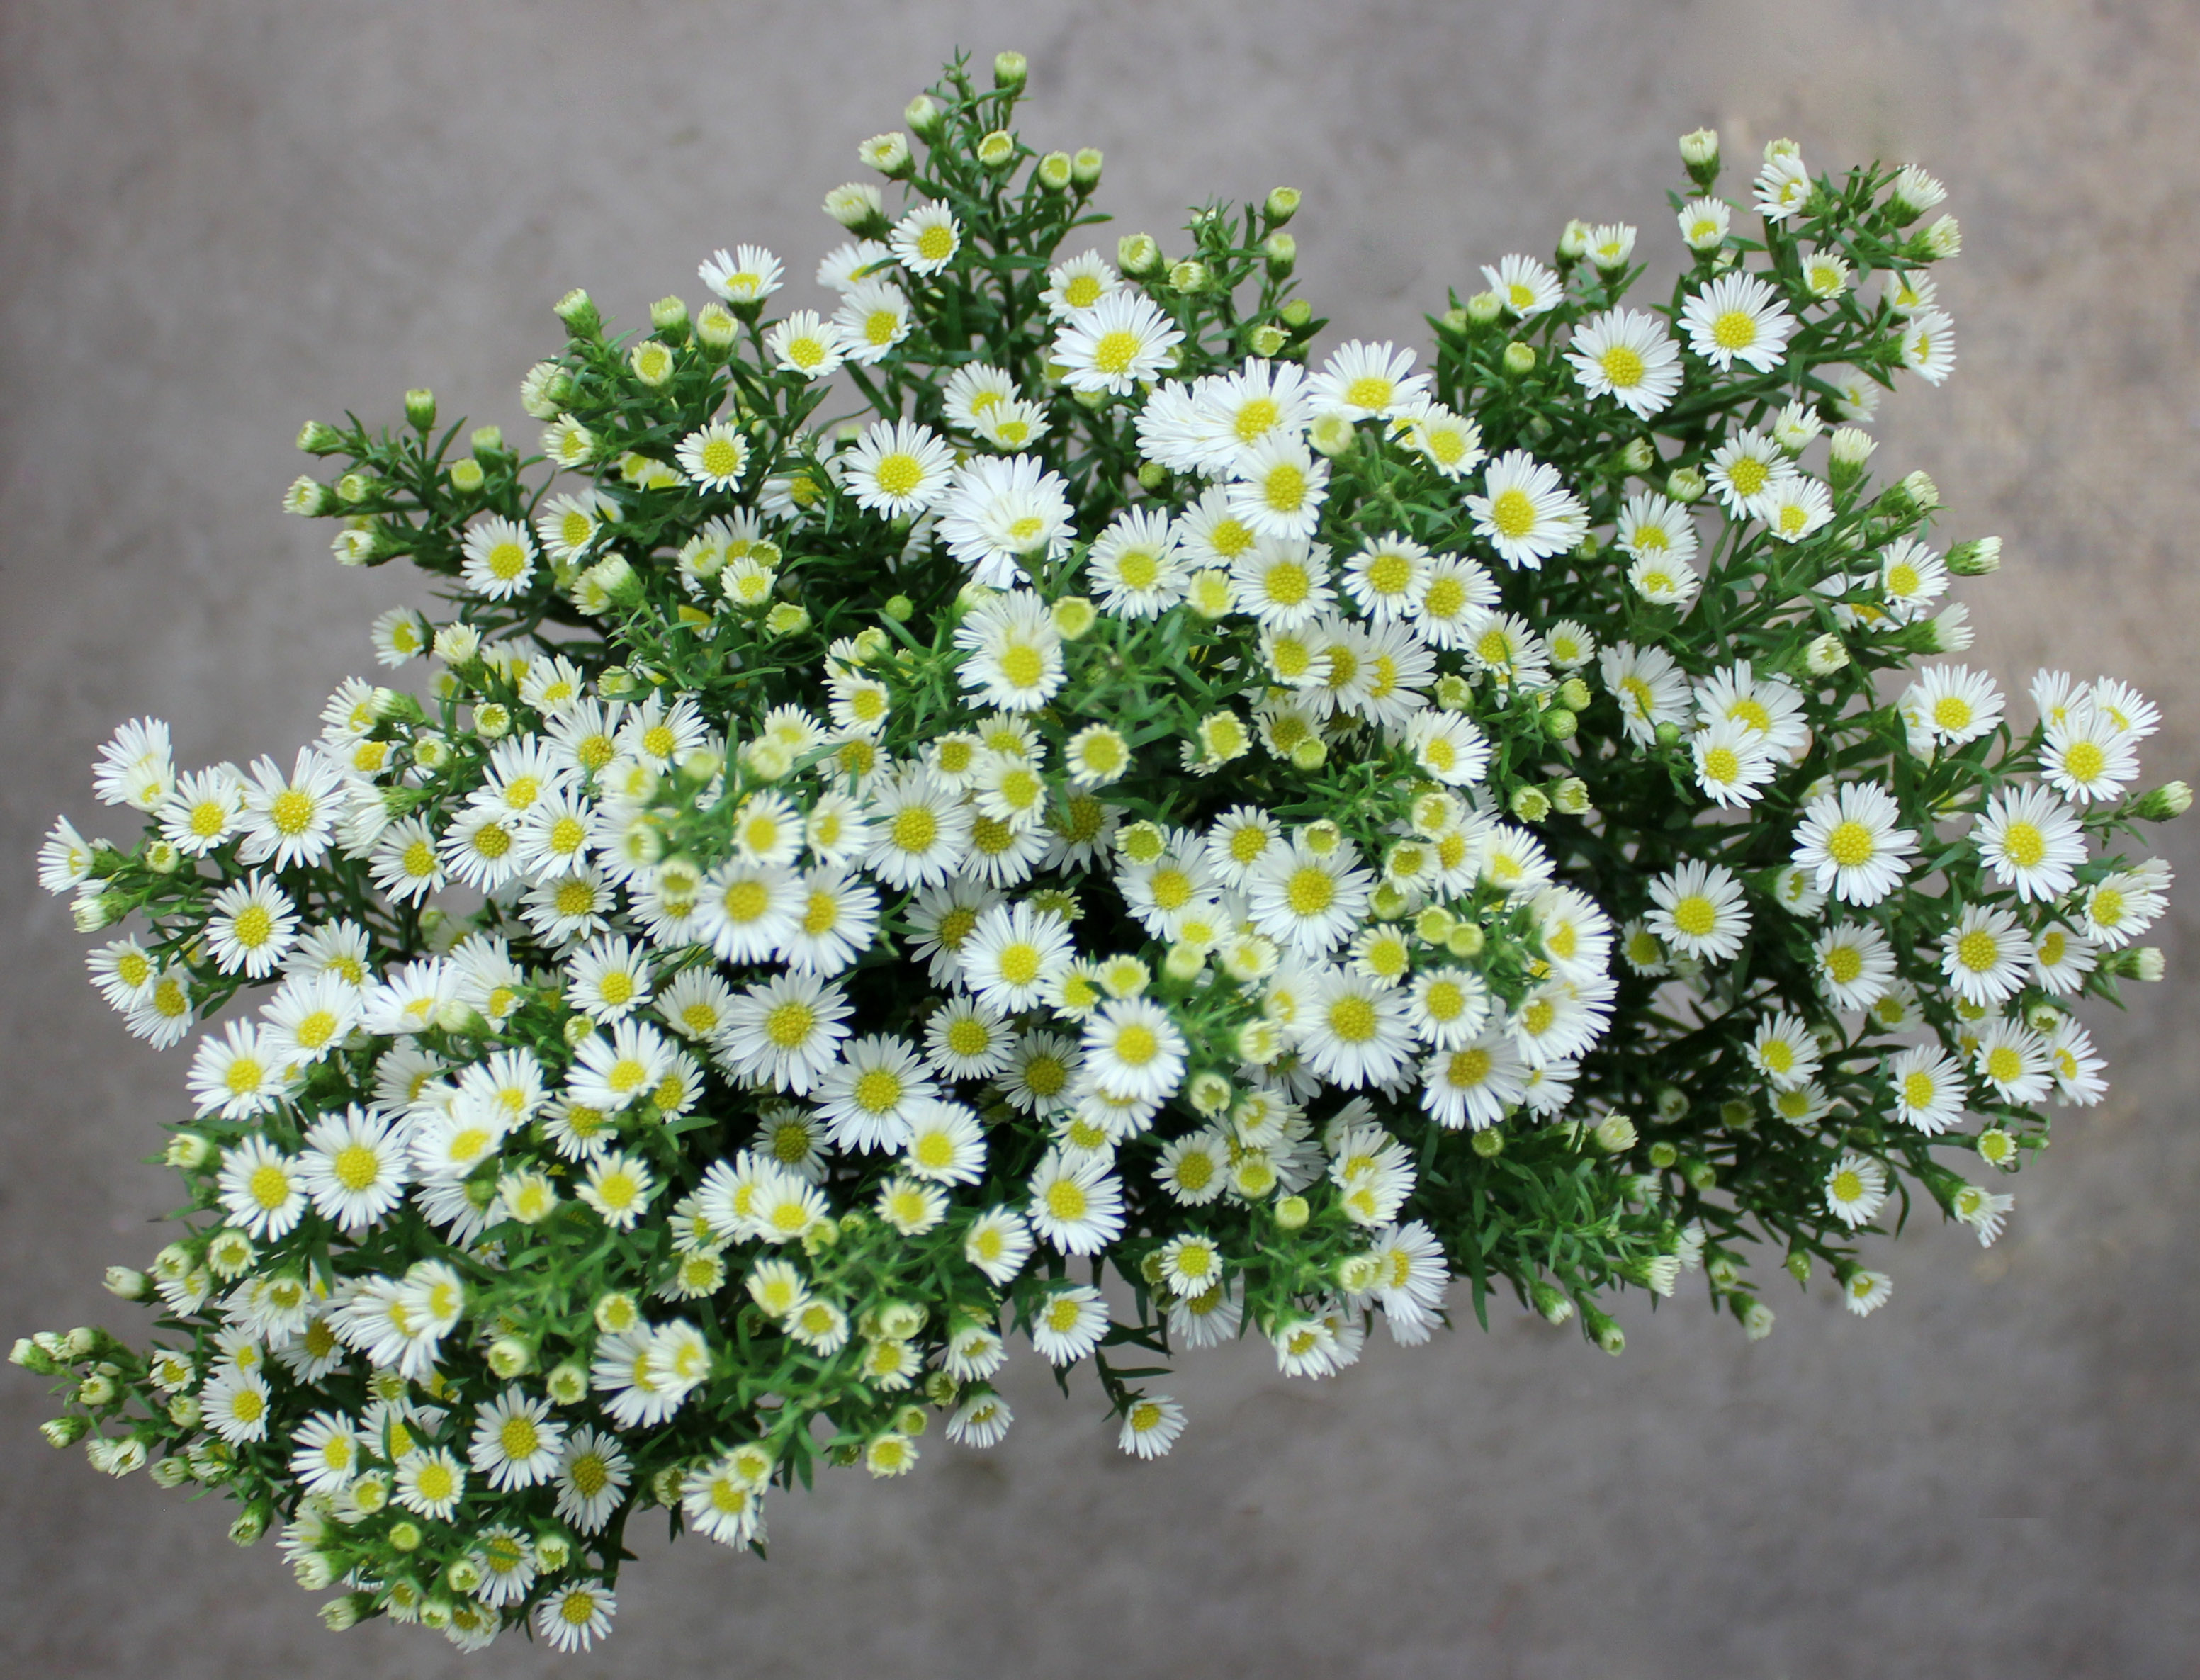 Monte Casino Aster White Flower - Wholesale - Blooms By The Box